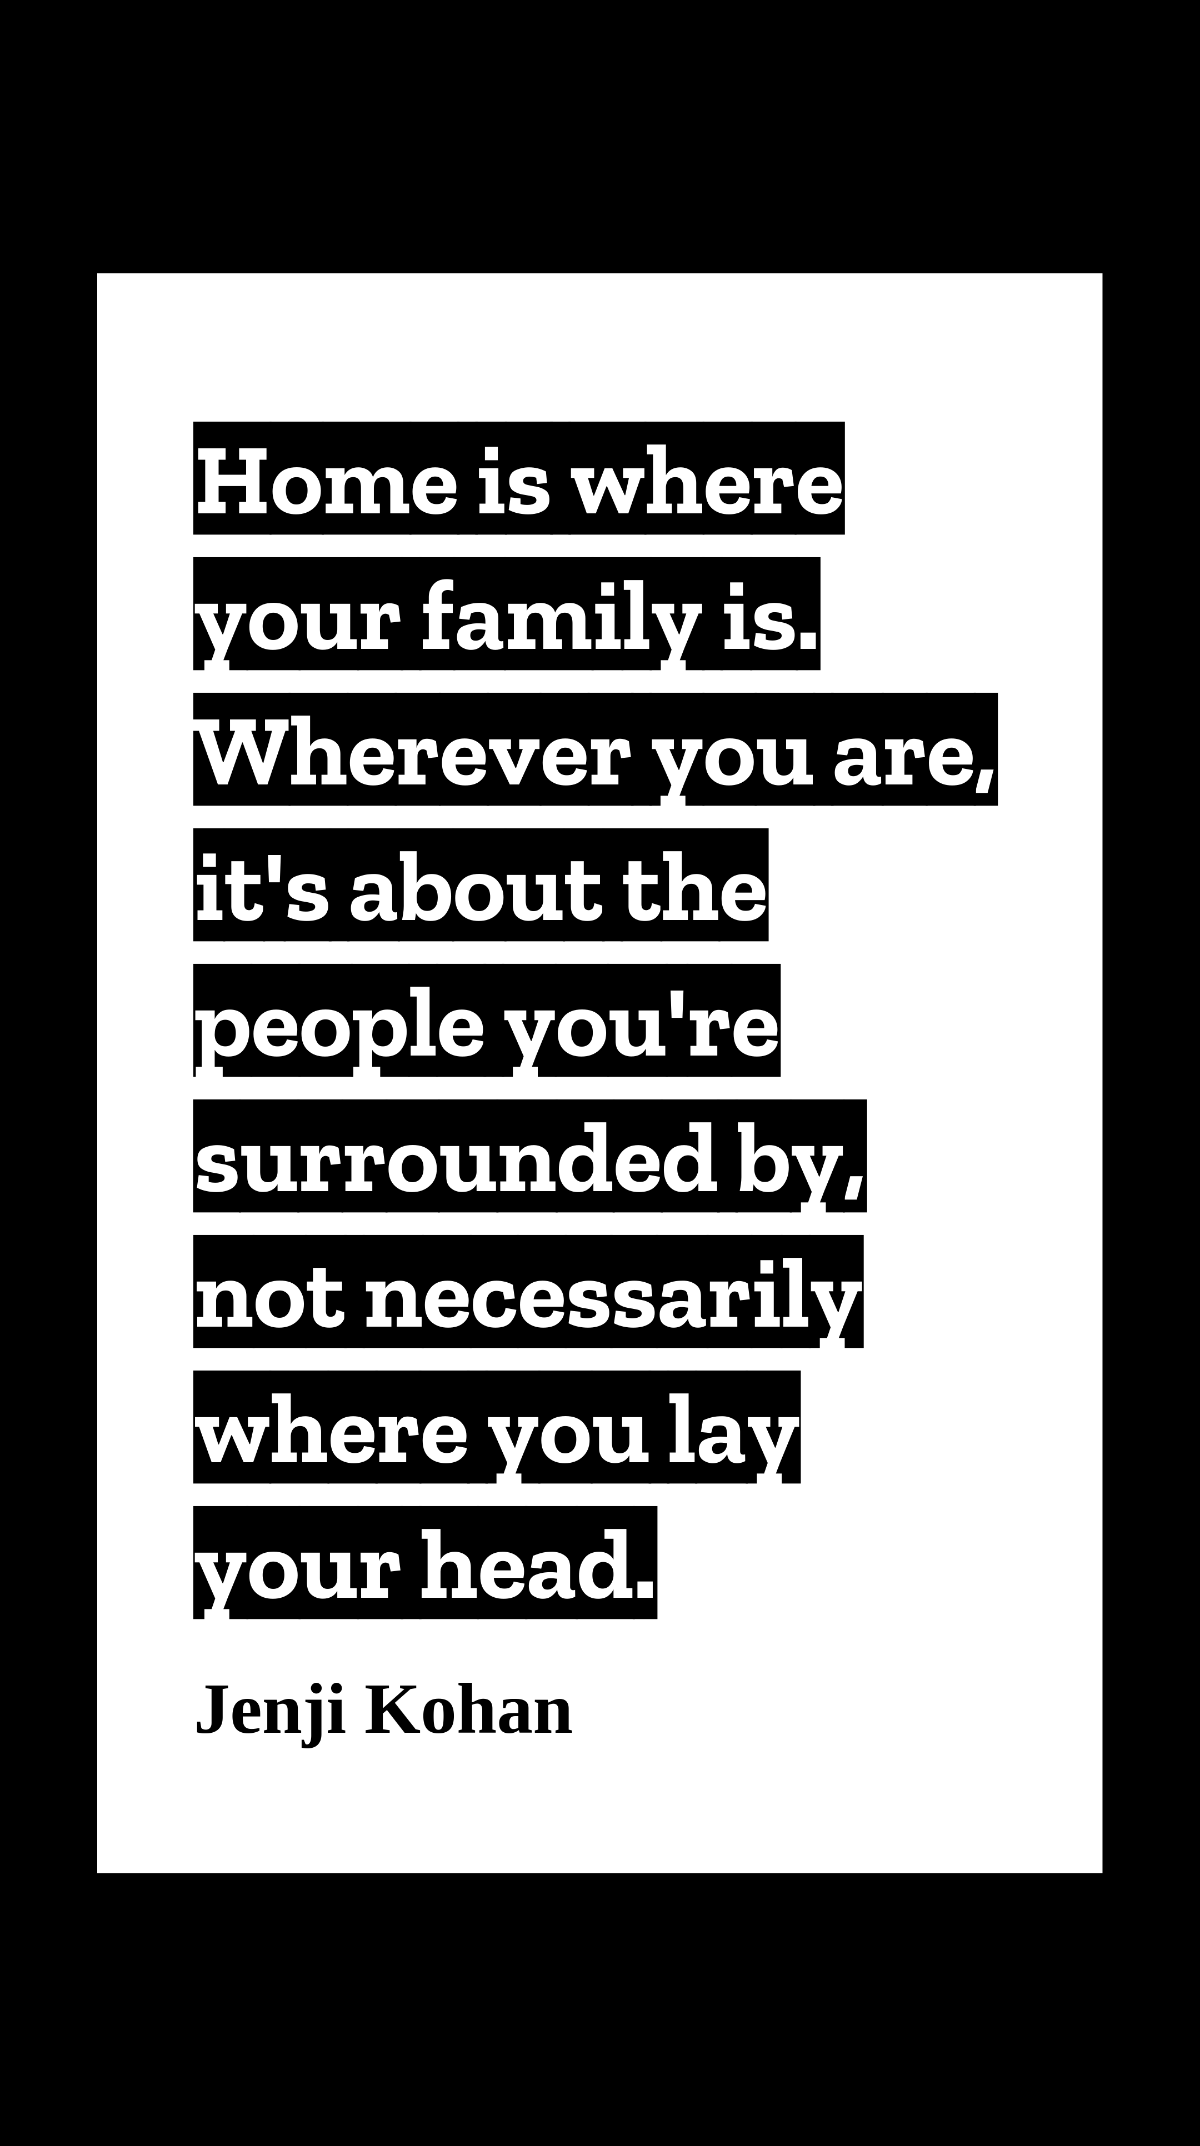 Free Jenji Kohan - Home is where your family is. Wherever you are, it's about the people you're surrounded by, not necessarily where you lay your head. Template